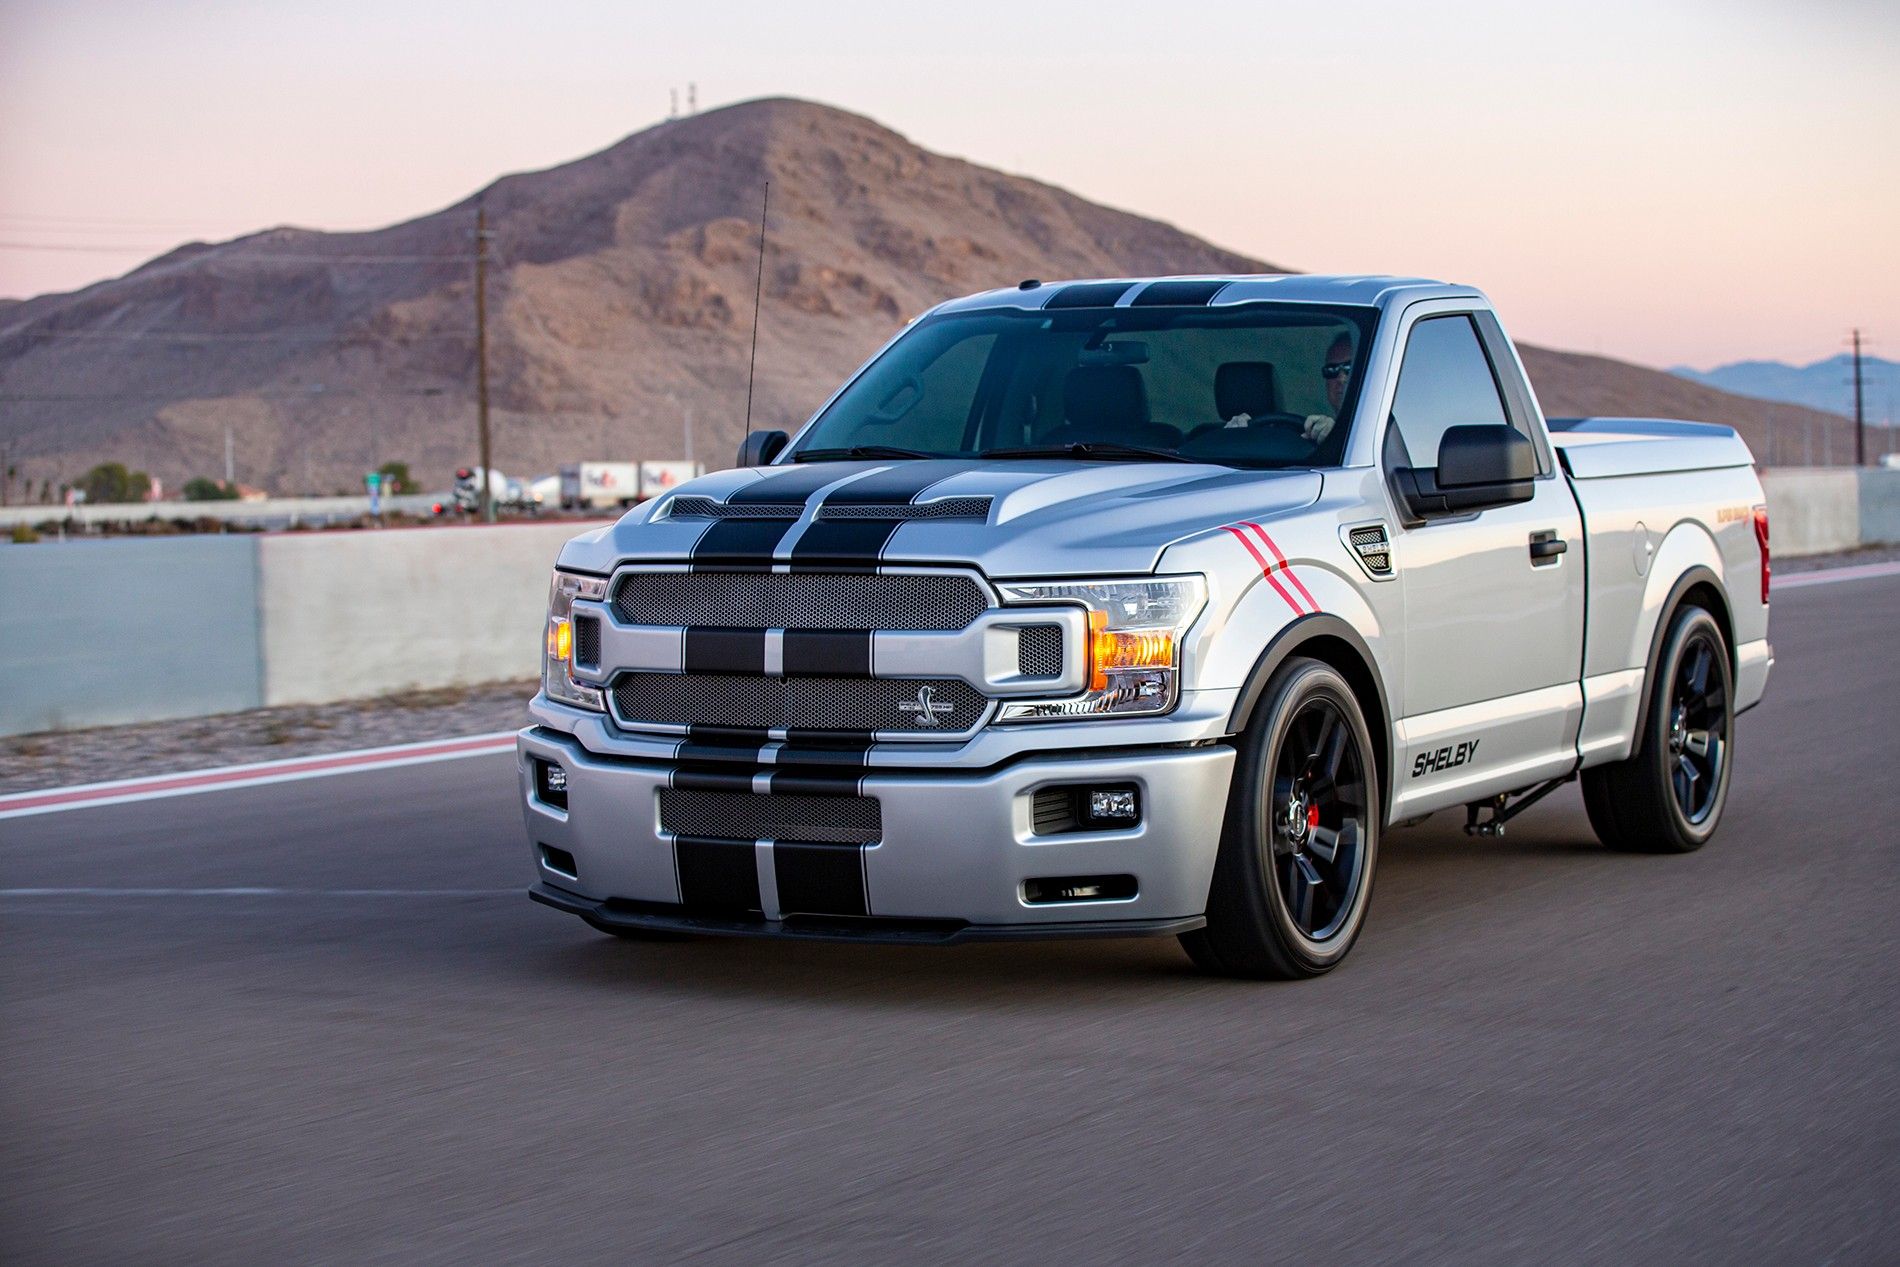 Meet This Insane Ford Shelby Truck A Hp F Super Snake